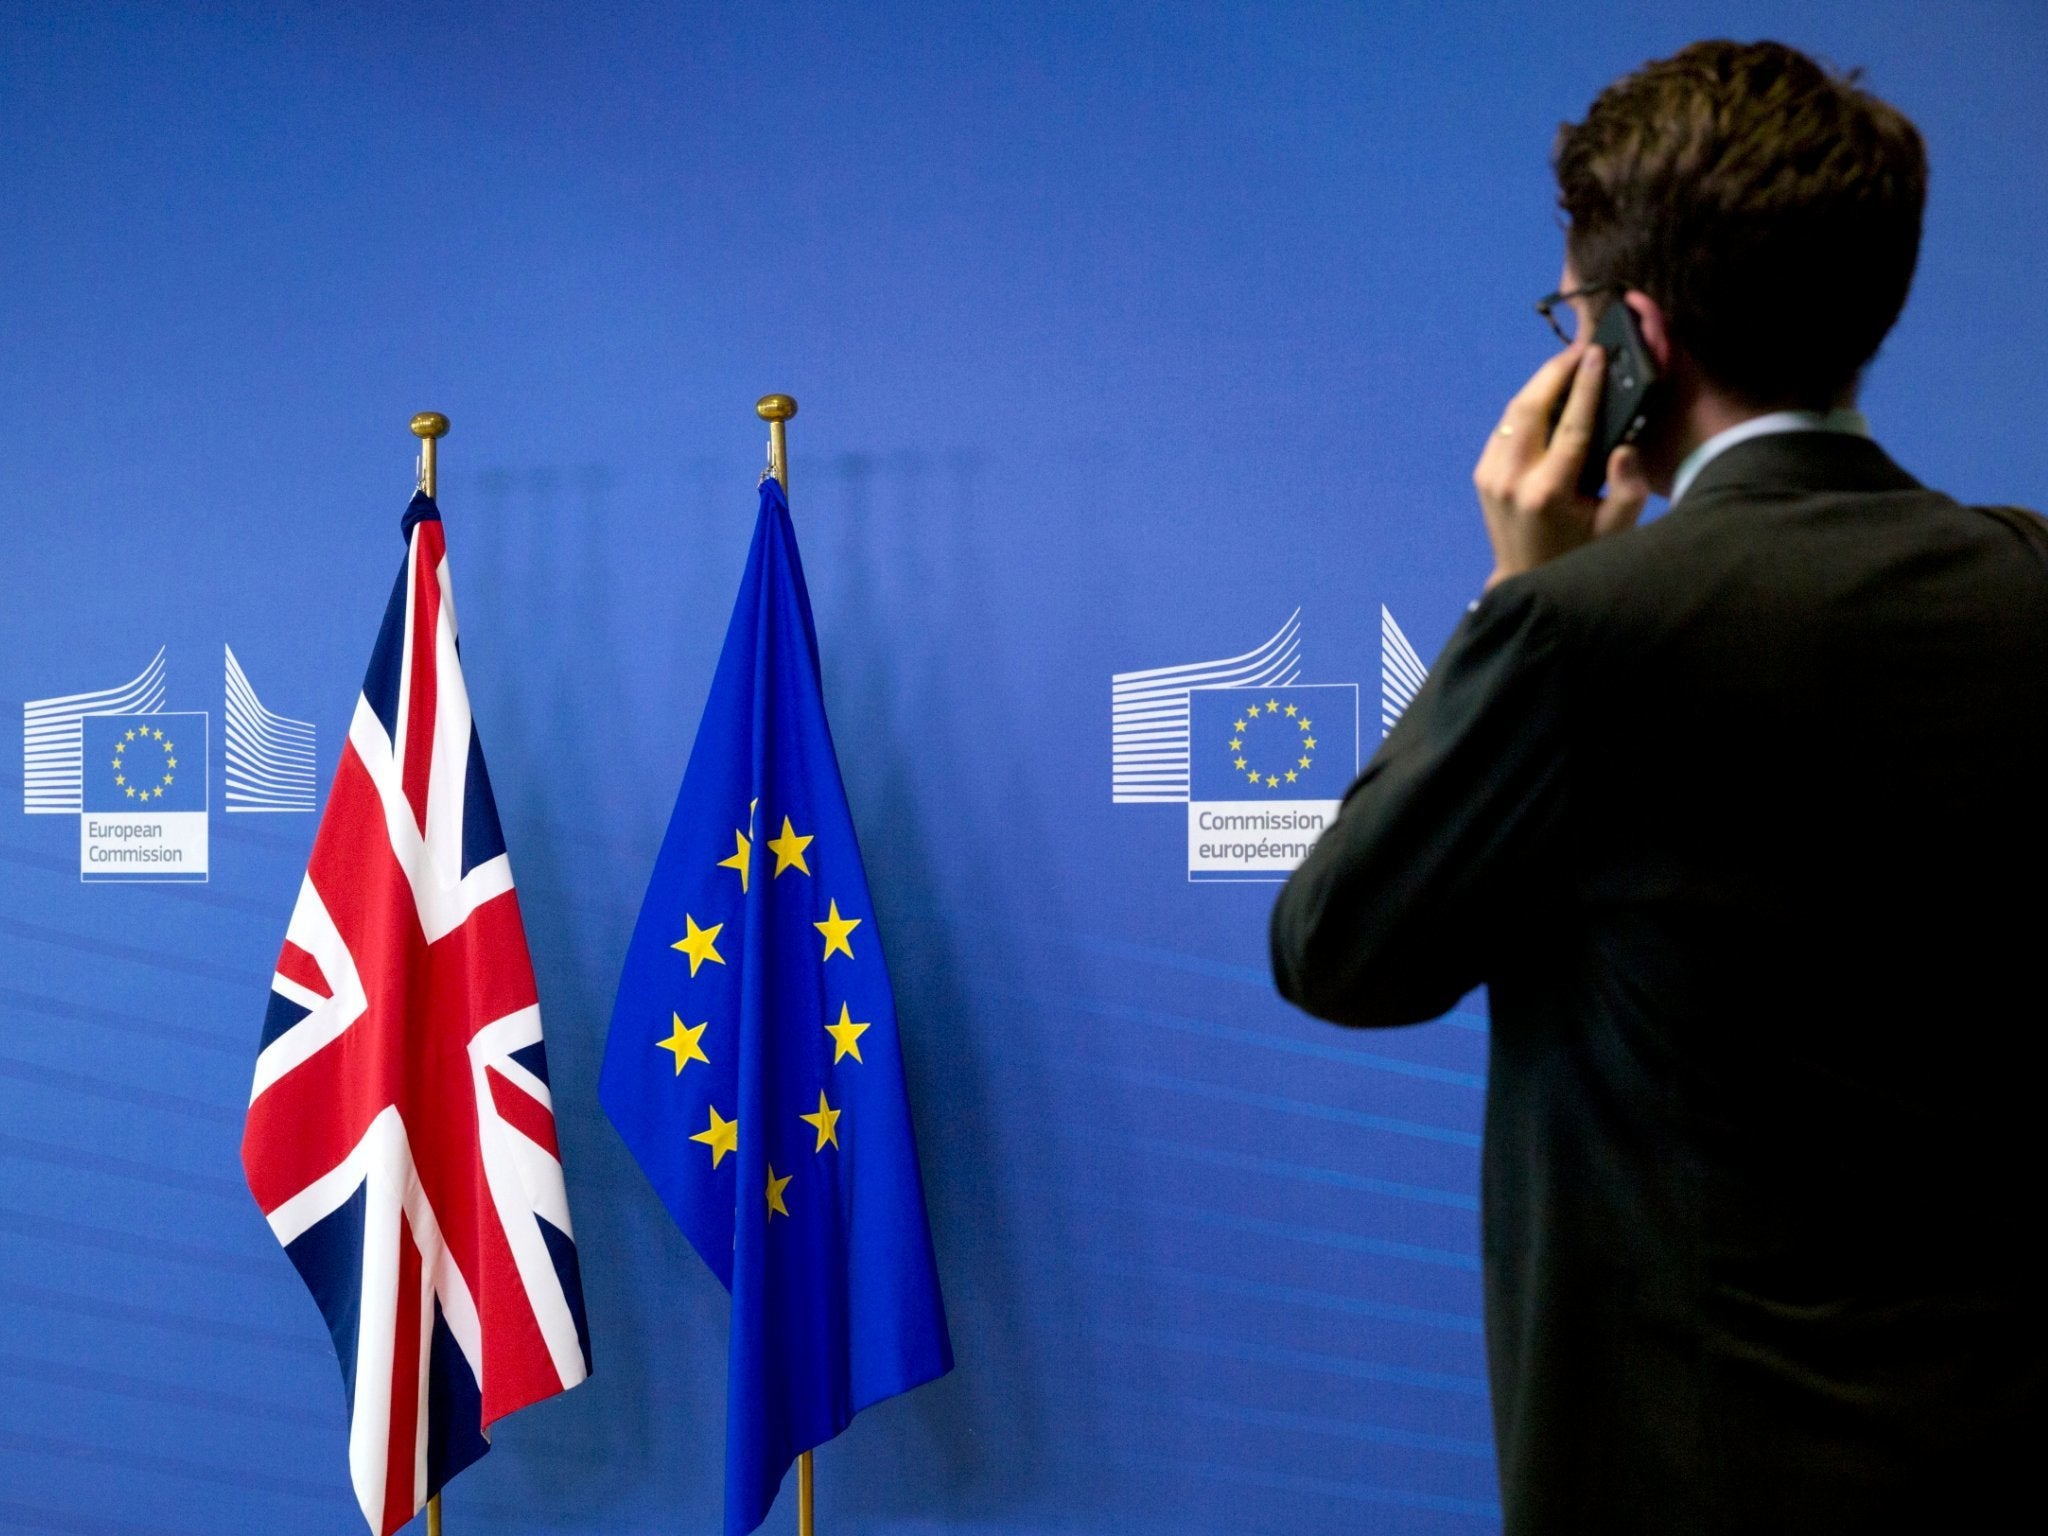 A member of the British delegation speaks on a mobile phone prior to the arrival of Britain's Secretary of State for Exiting the European Union Dominic Raab and EU chief Brexit negotiator Michel Barnier at EU headquarters in Brussels on Friday, Aug. 31, 2018